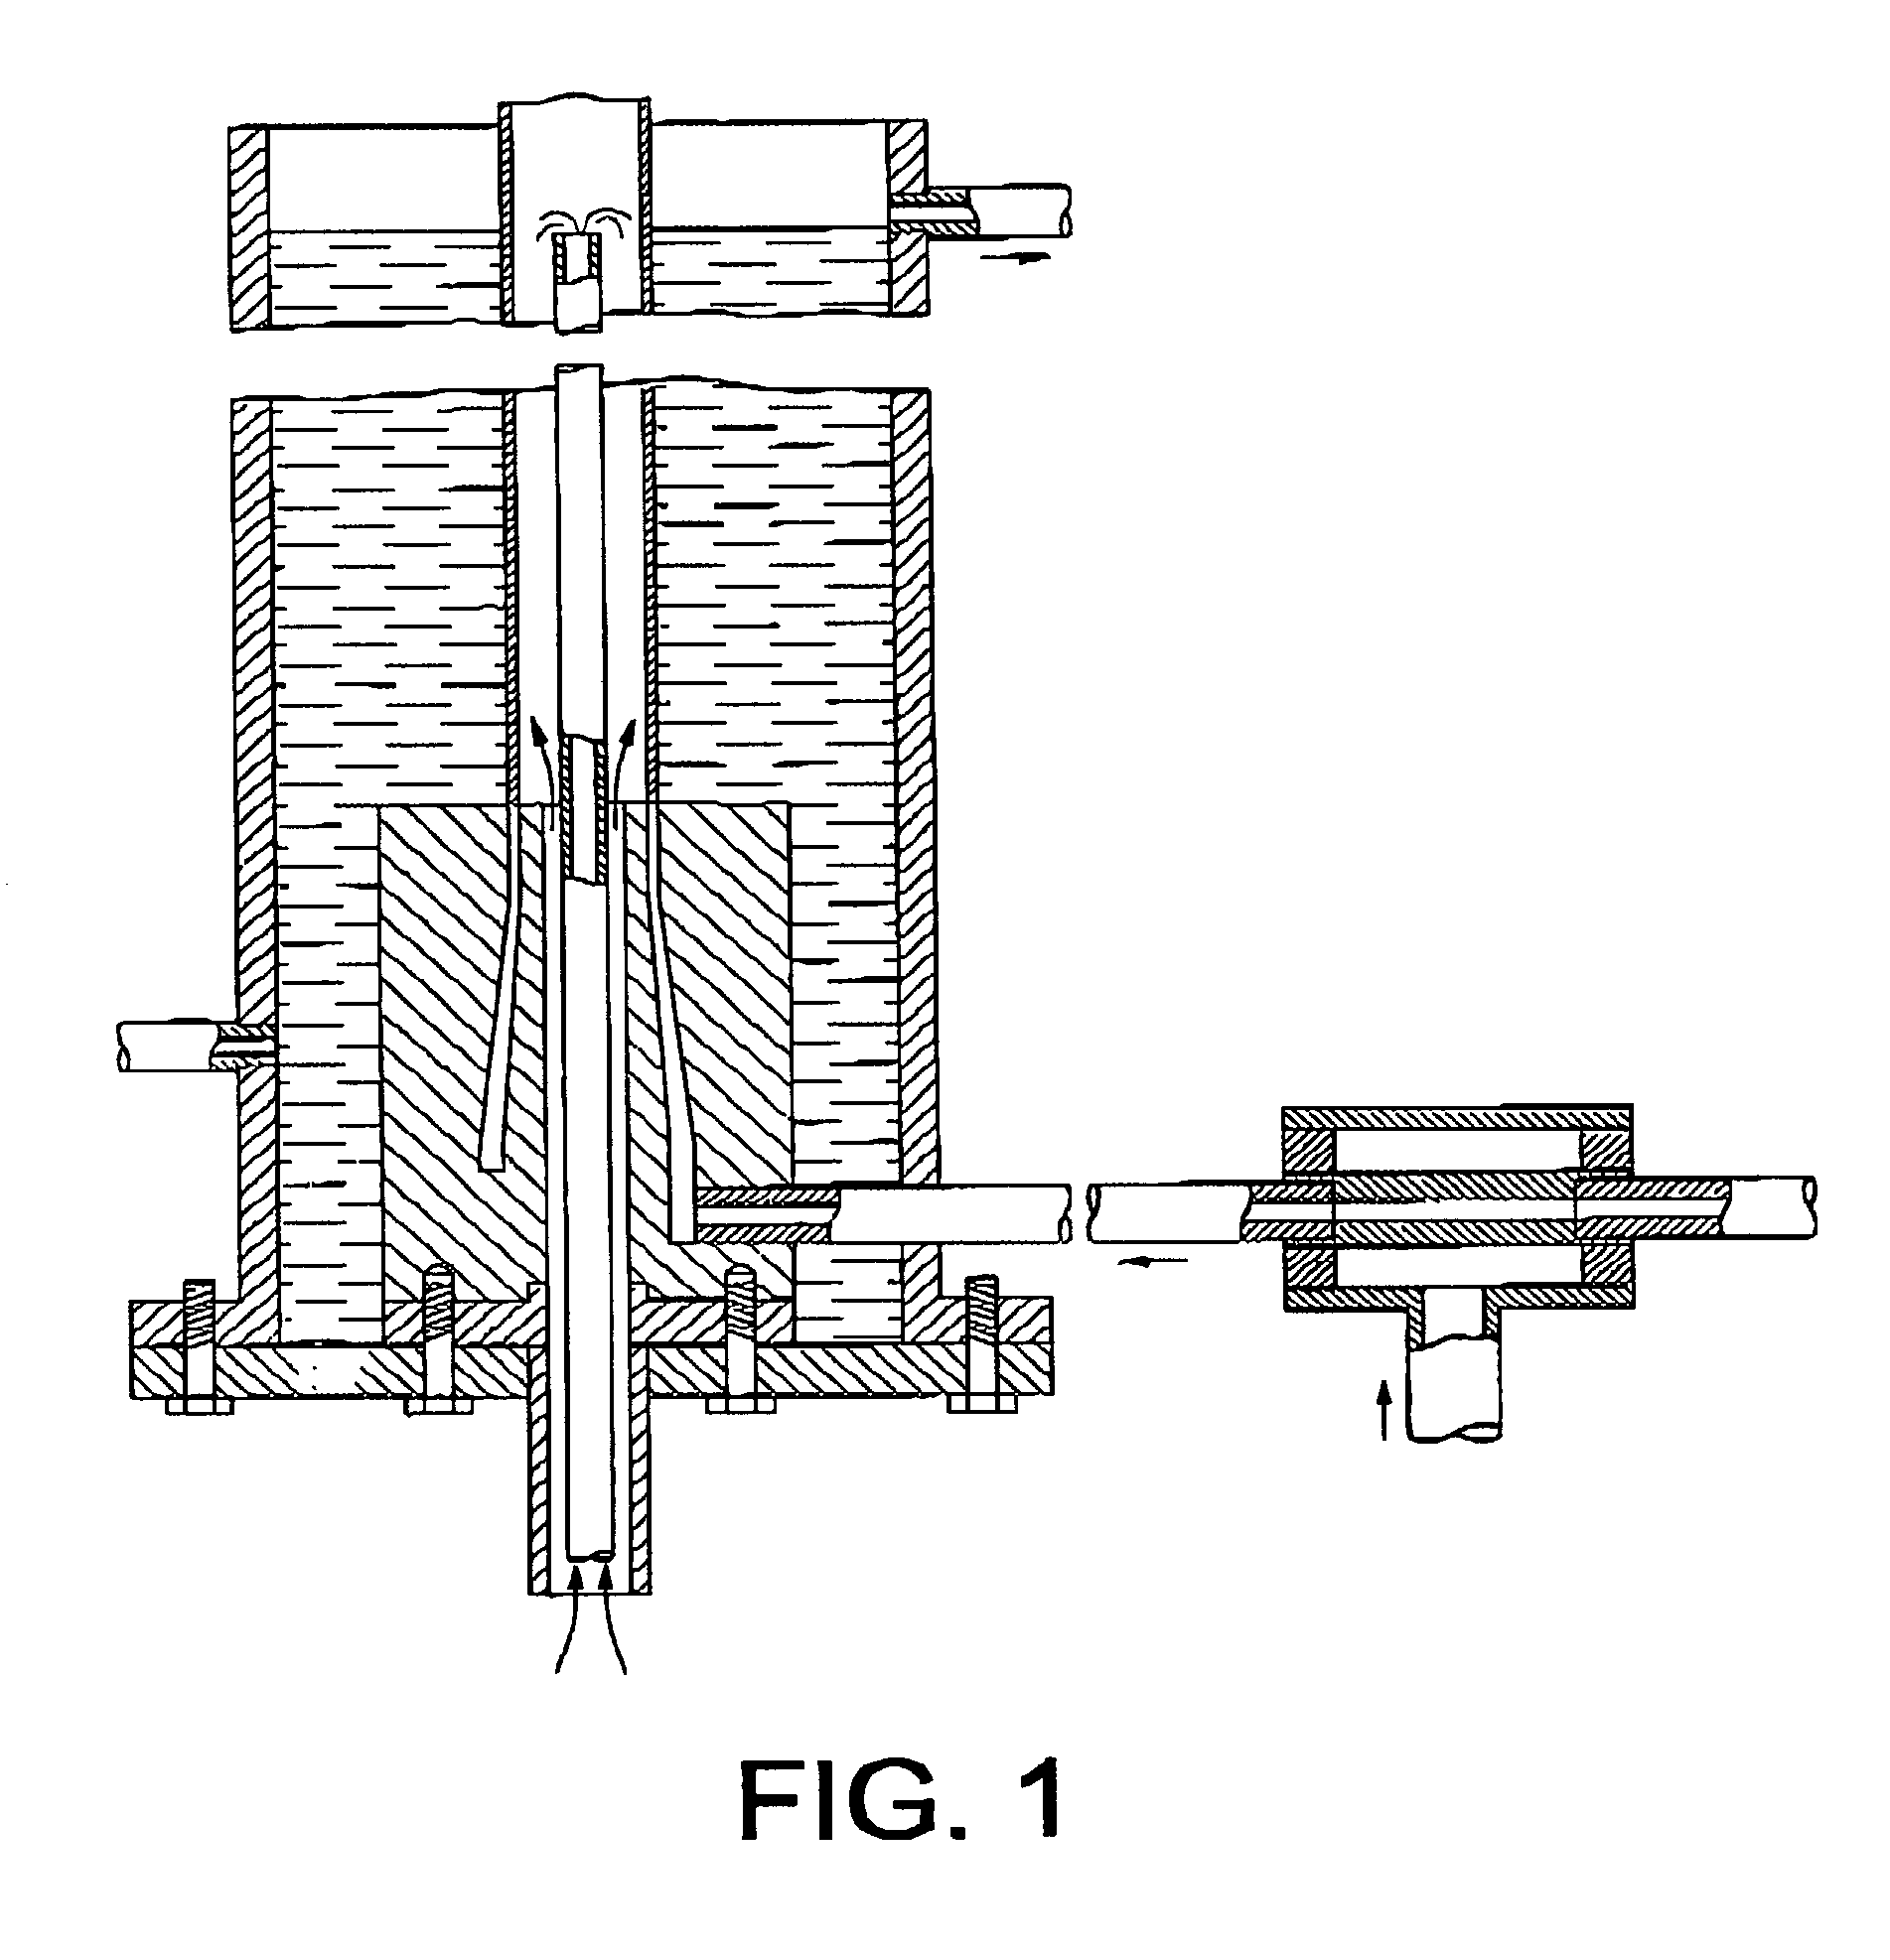 Multilayered cellulose casing, method of manufacture thereof and extrusion head for obtaining said casing